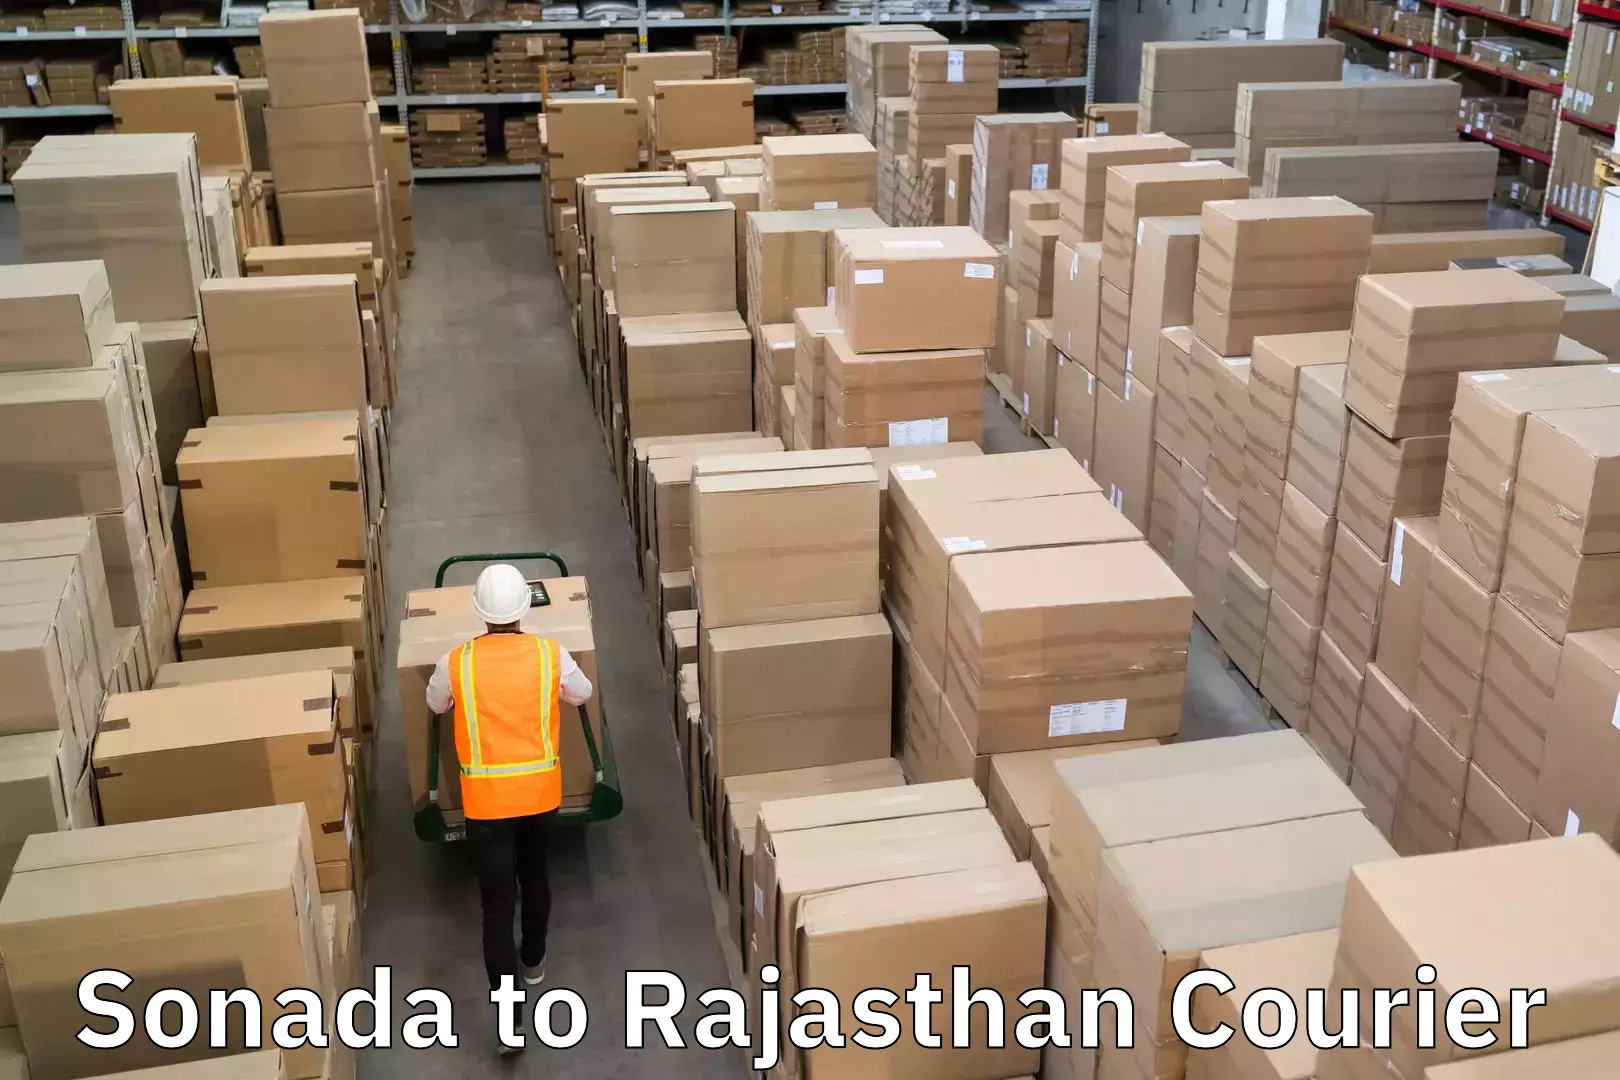 Reliable logistics providers Sonada to Rajasthan